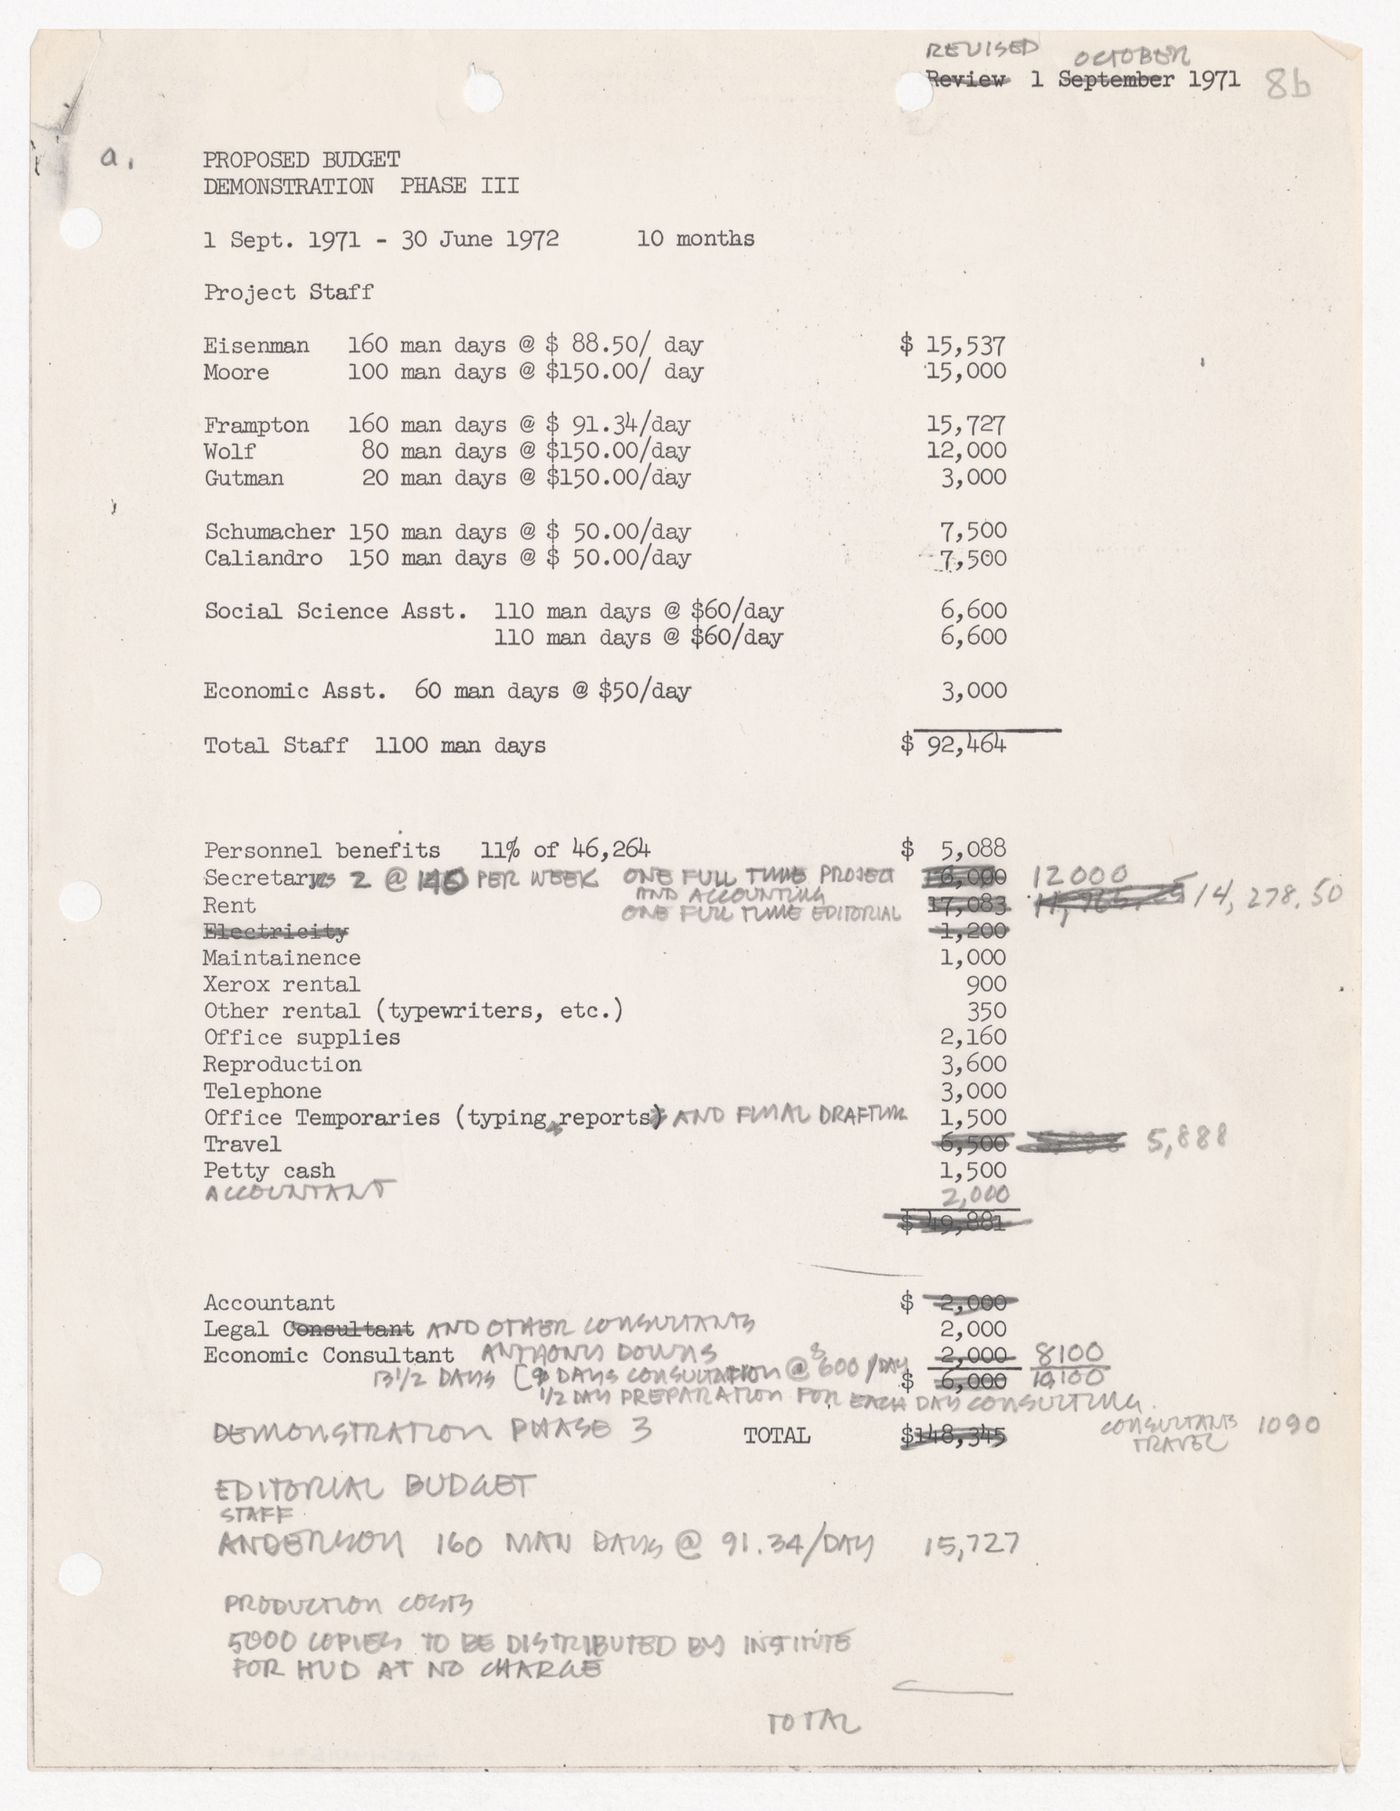 Proposed budget demonstration phase III from September 1st, 1971 to June 30th, 1972 with annotations by Peter D. Eisenman